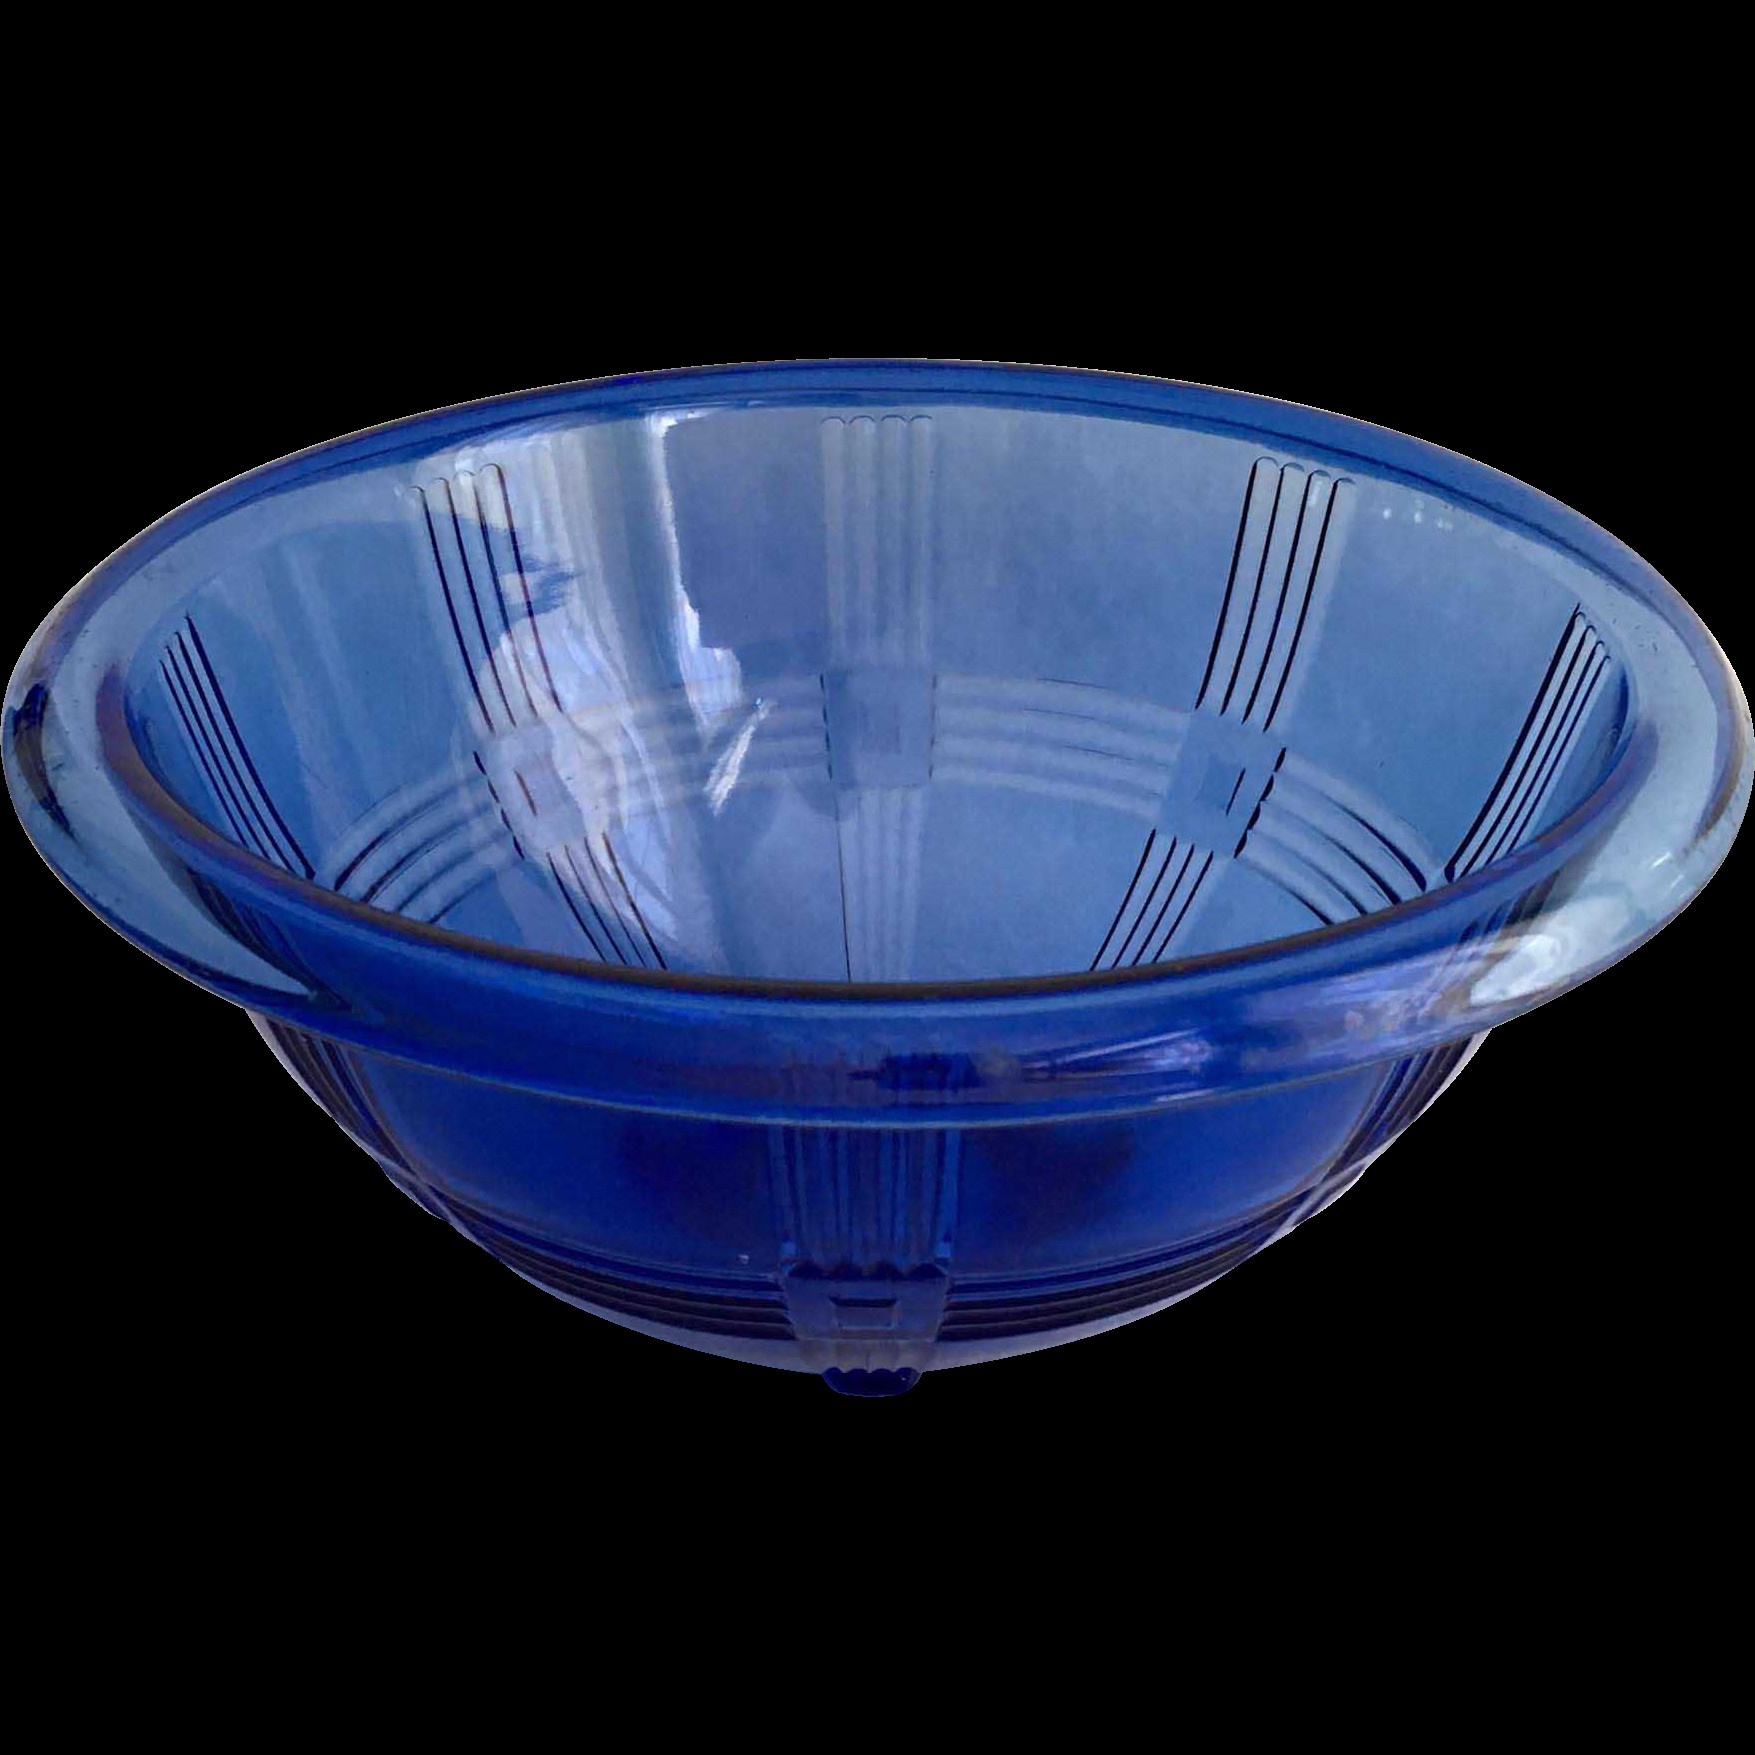 28 Stunning Blue Square Glass Vase 2024 free download blue square glass vase of hazel atlas cobalt blue crisscross depression glass mixing bowl pertaining to hazel atlas cobalt blue crisscross depression glass mixing bowl